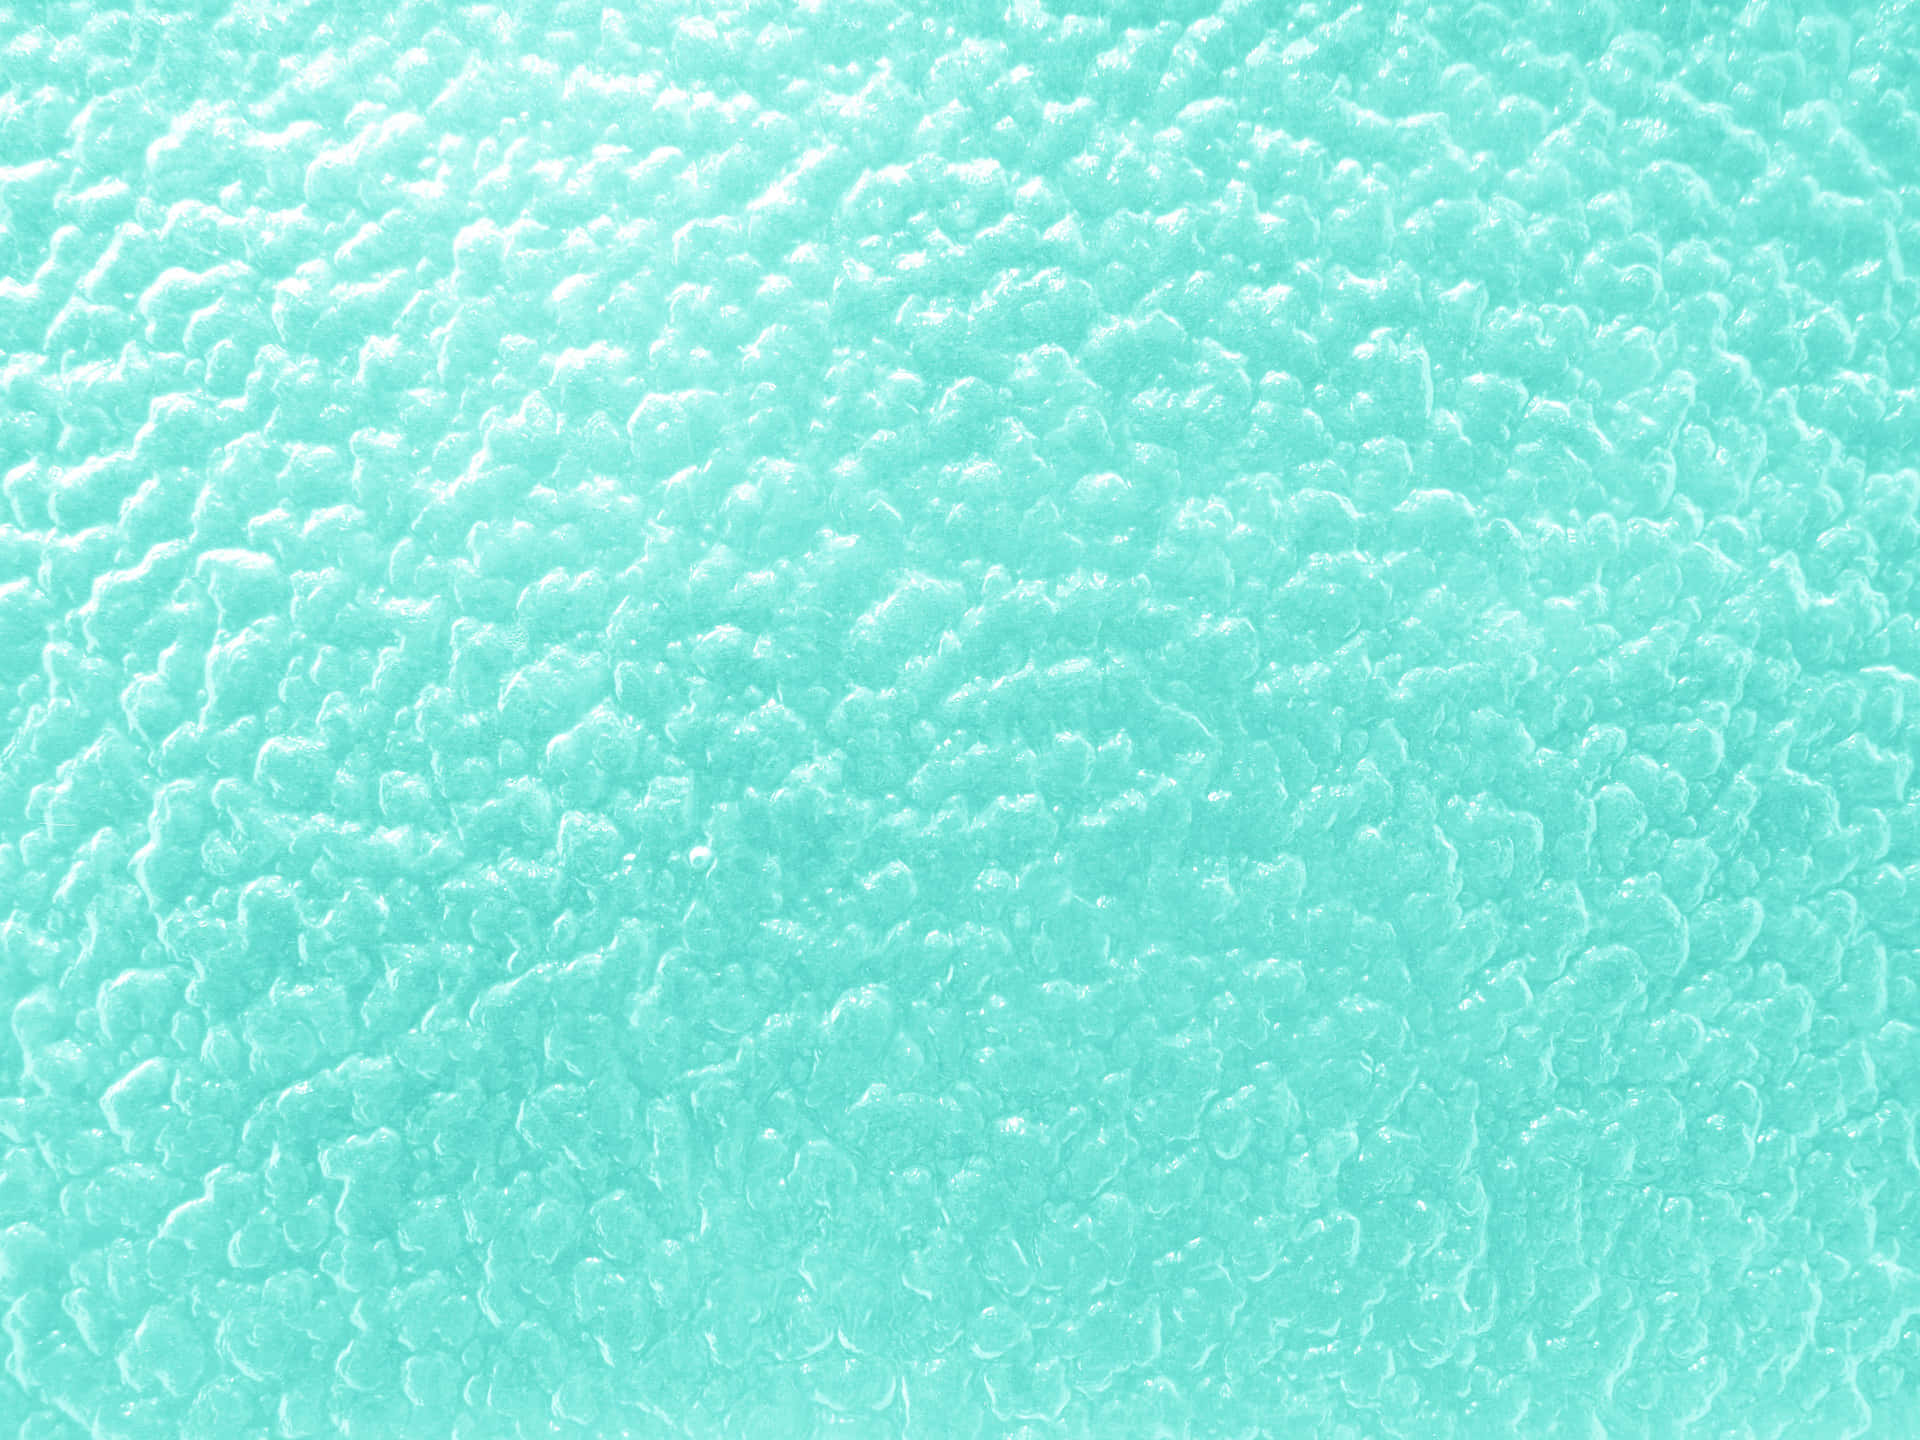 A Bright and Serene Turquoise Background